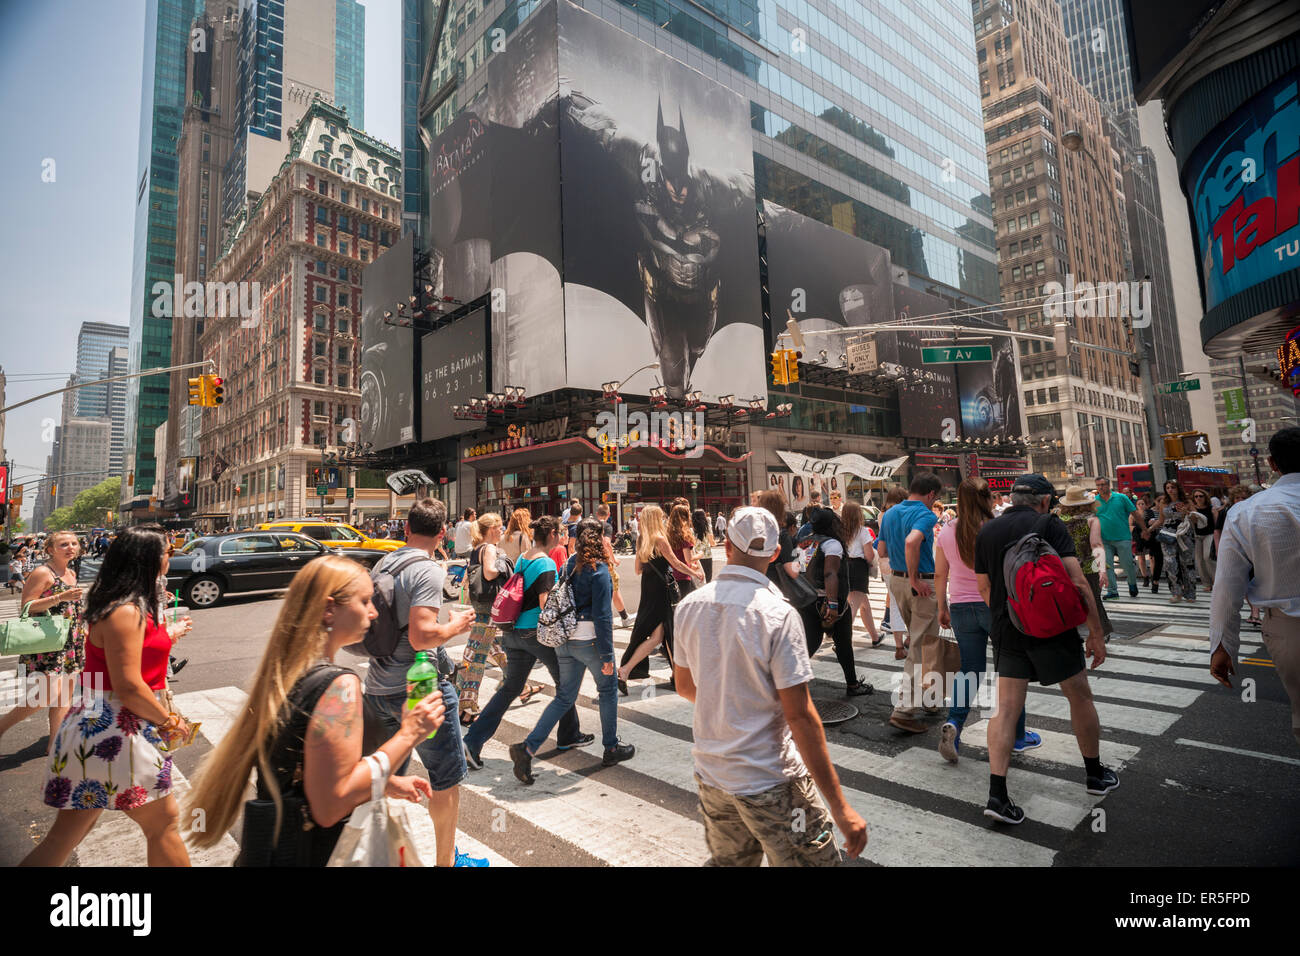 Passerby walk past advertising for RocksteadyStudio's new videogame, "Batman: Arkham Knight " on a billboard in Times Square in New York on Wednesday, May 27, 2015. The game, the third part of the "Arkham" trilogy will be available on June 23. (© Richard B. Levine) Stock Photo